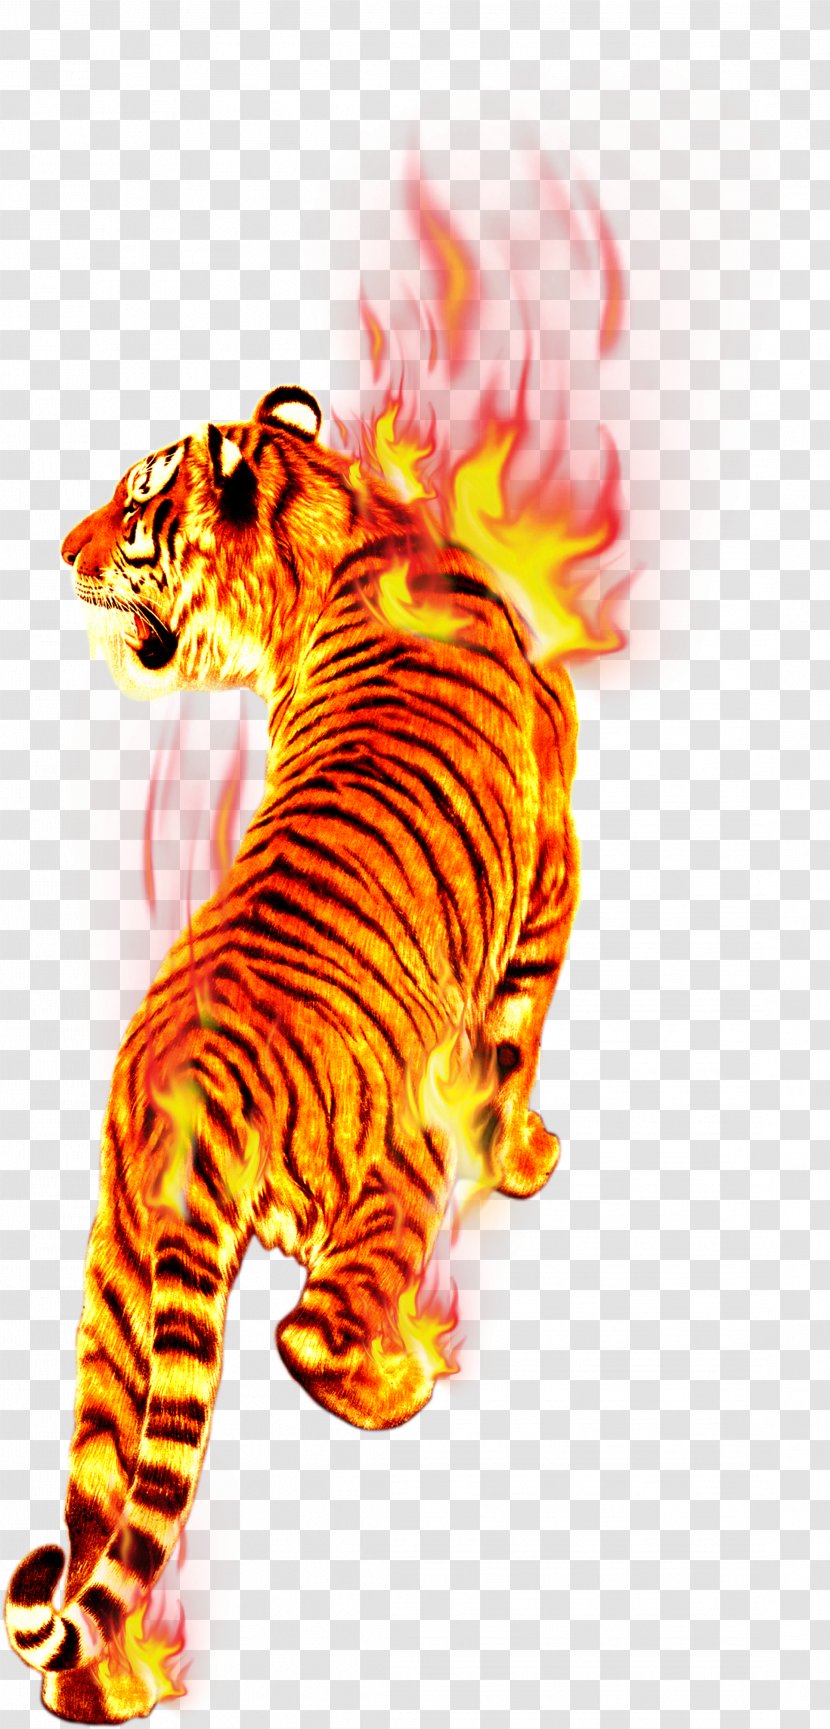 Flame Fire Tiger Combustion - In Flames Transparent PNG